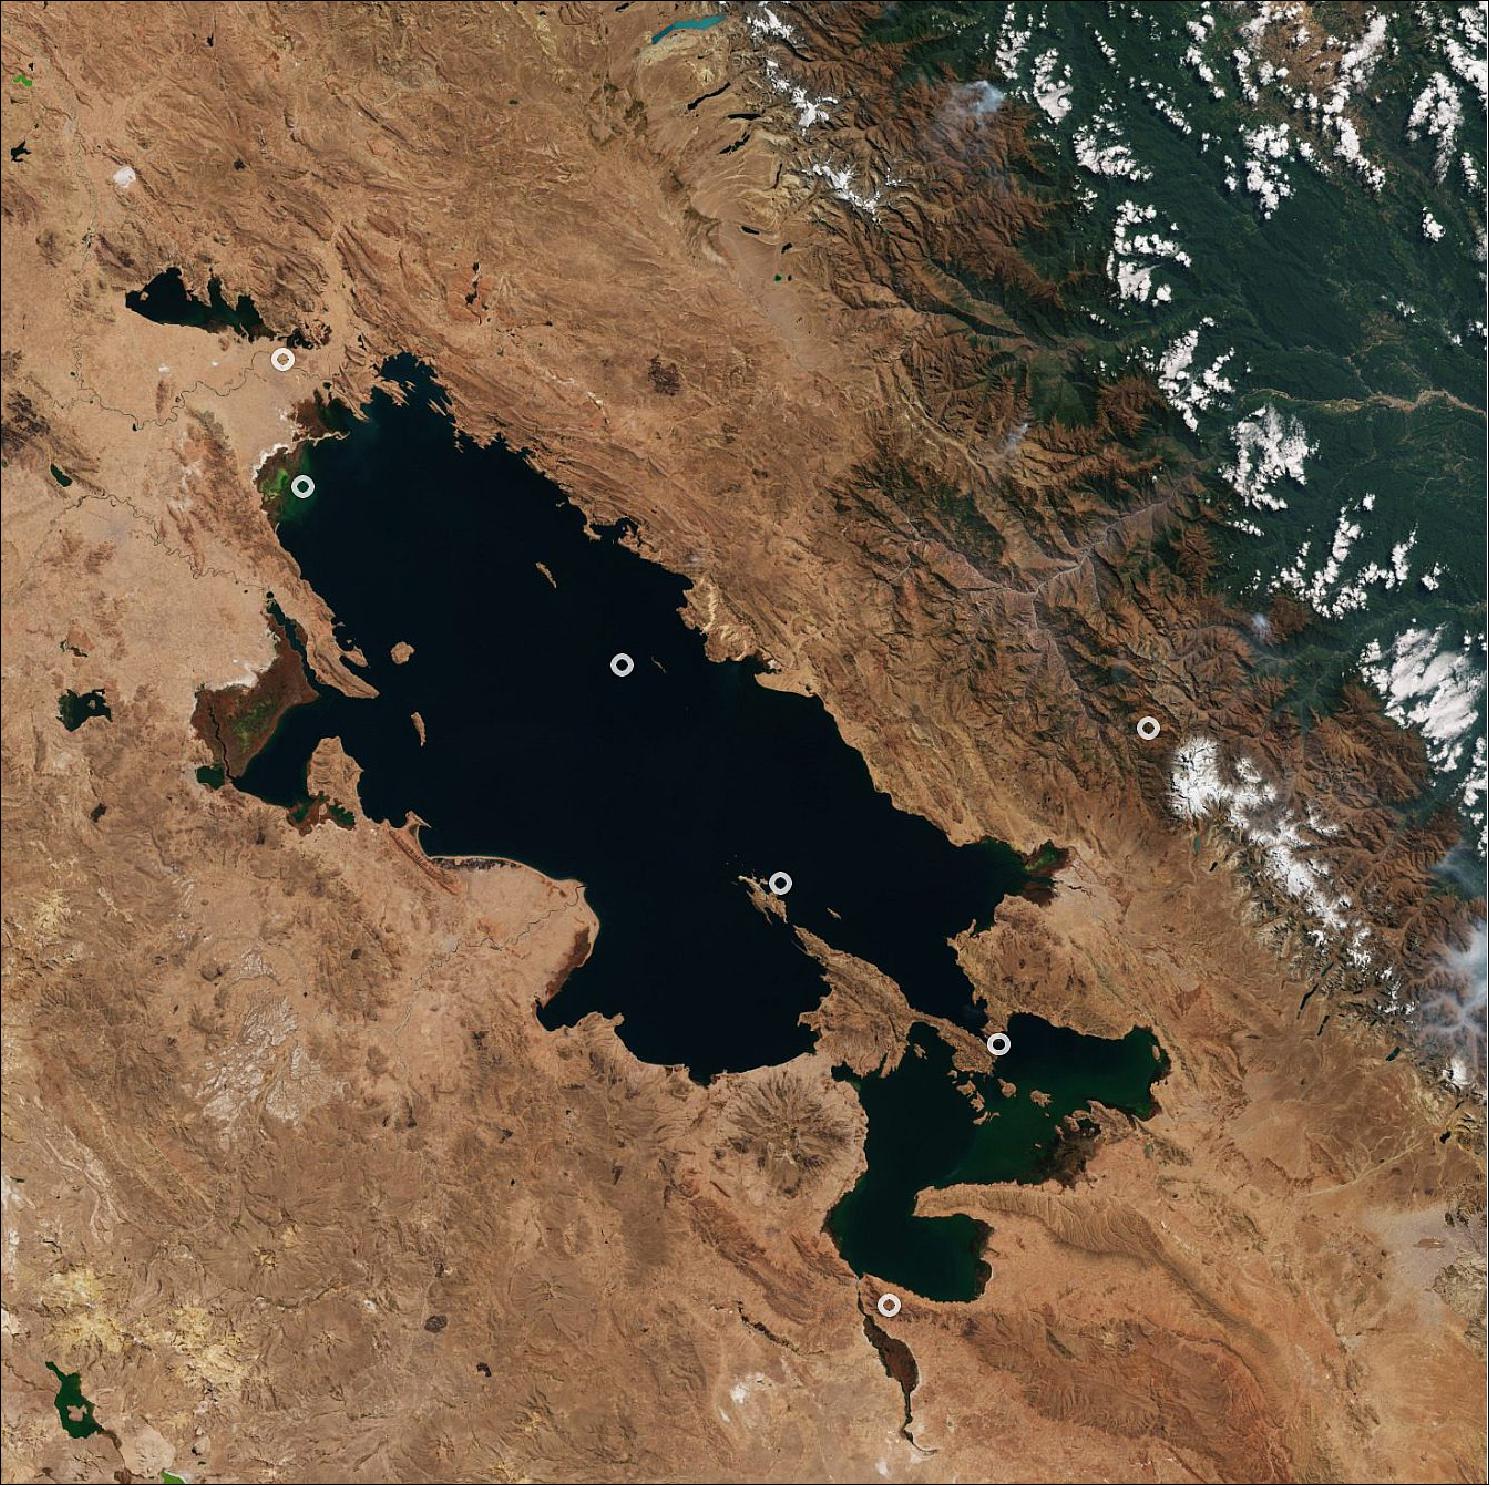 Figure 76: Forty-one islands rise from Titicaca’s waters, the largest of which, Titicaca Island, or Isla del Sol in Spanish, can be seen just off the tip of the Copacabana Peninsula in Bolivia. Several green algal blooms can be seen in the lake, including in the lake’s northwest and southeast corners. Snow in the Andes mountain range can be seen in the top-right of the image. This image is also featured on the Earth from Space video program (image credit: ESA, the image contains modified Copernicus Sentinel data (2020), processed by ESA, CC BY-SA 3.0 IGO)